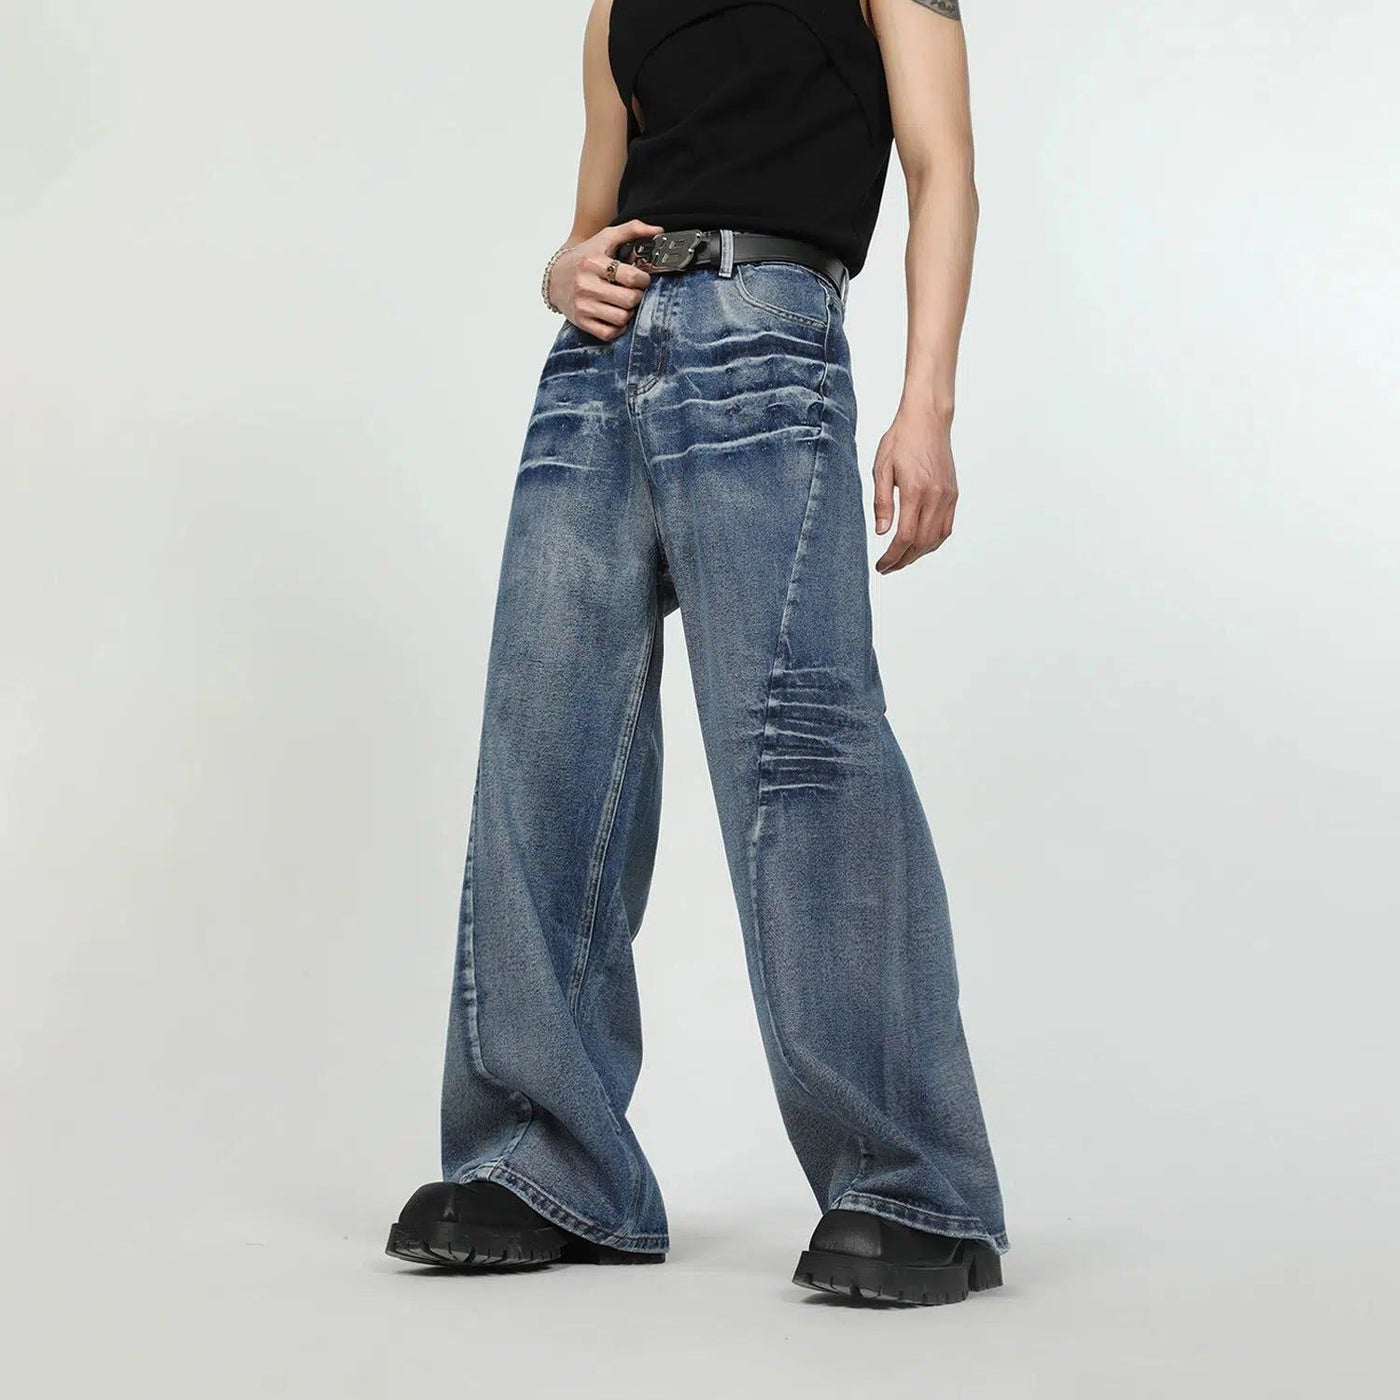 Washed and Whiskers Jeans Korean Street Fashion Jeans By Turn Tide Shop Online at OH Vault